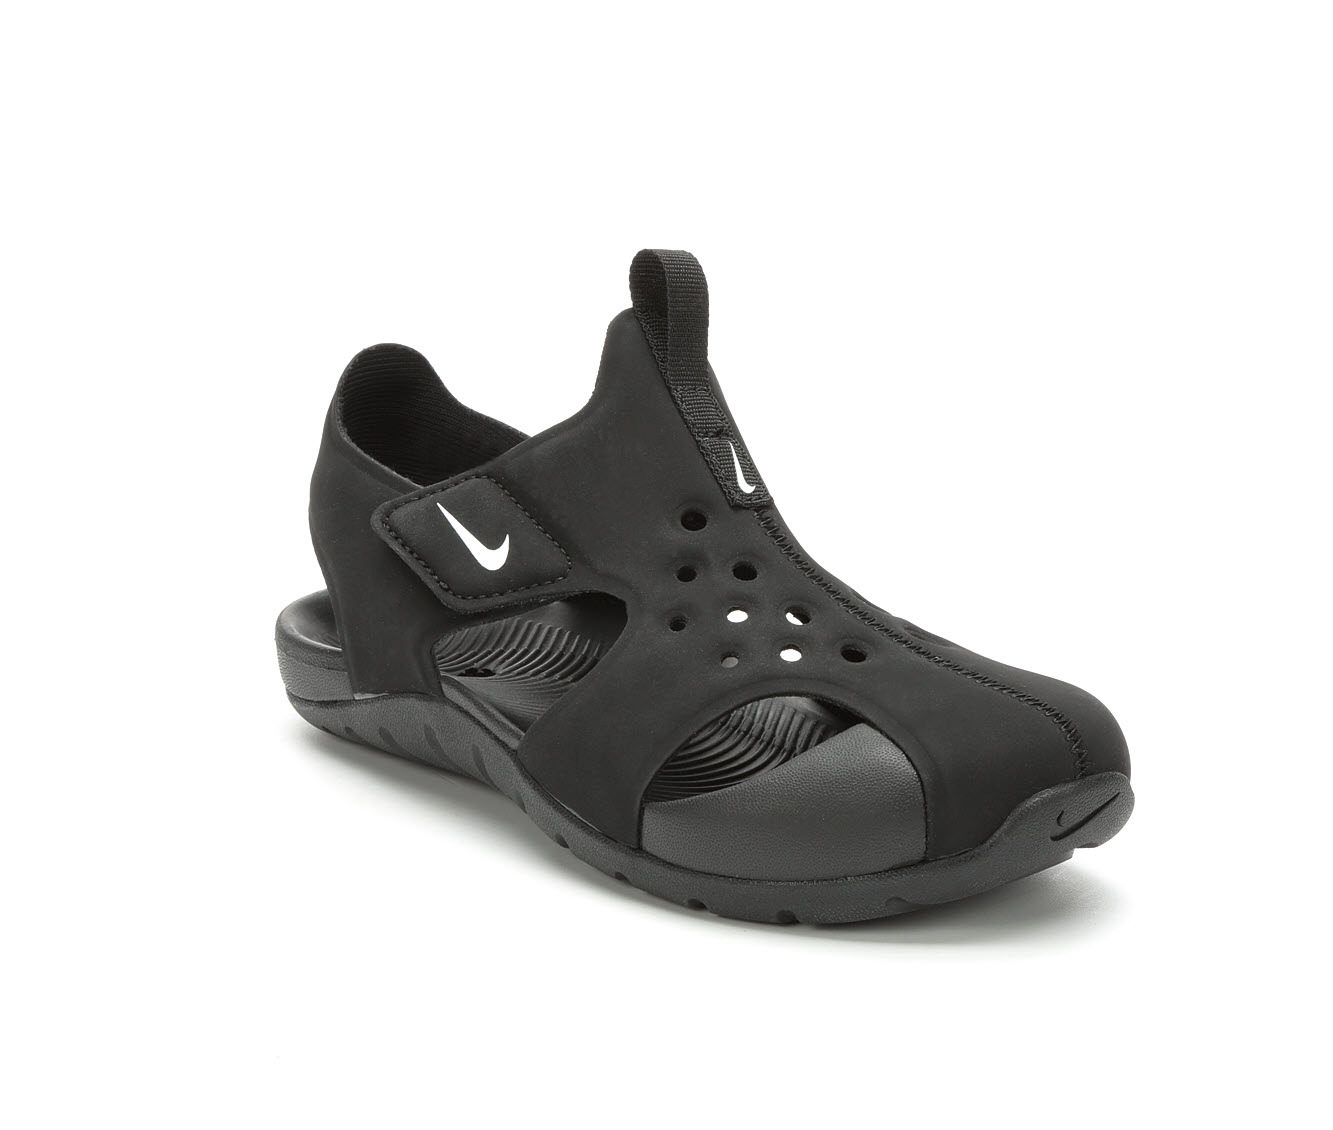 nike sunray protect water shoes